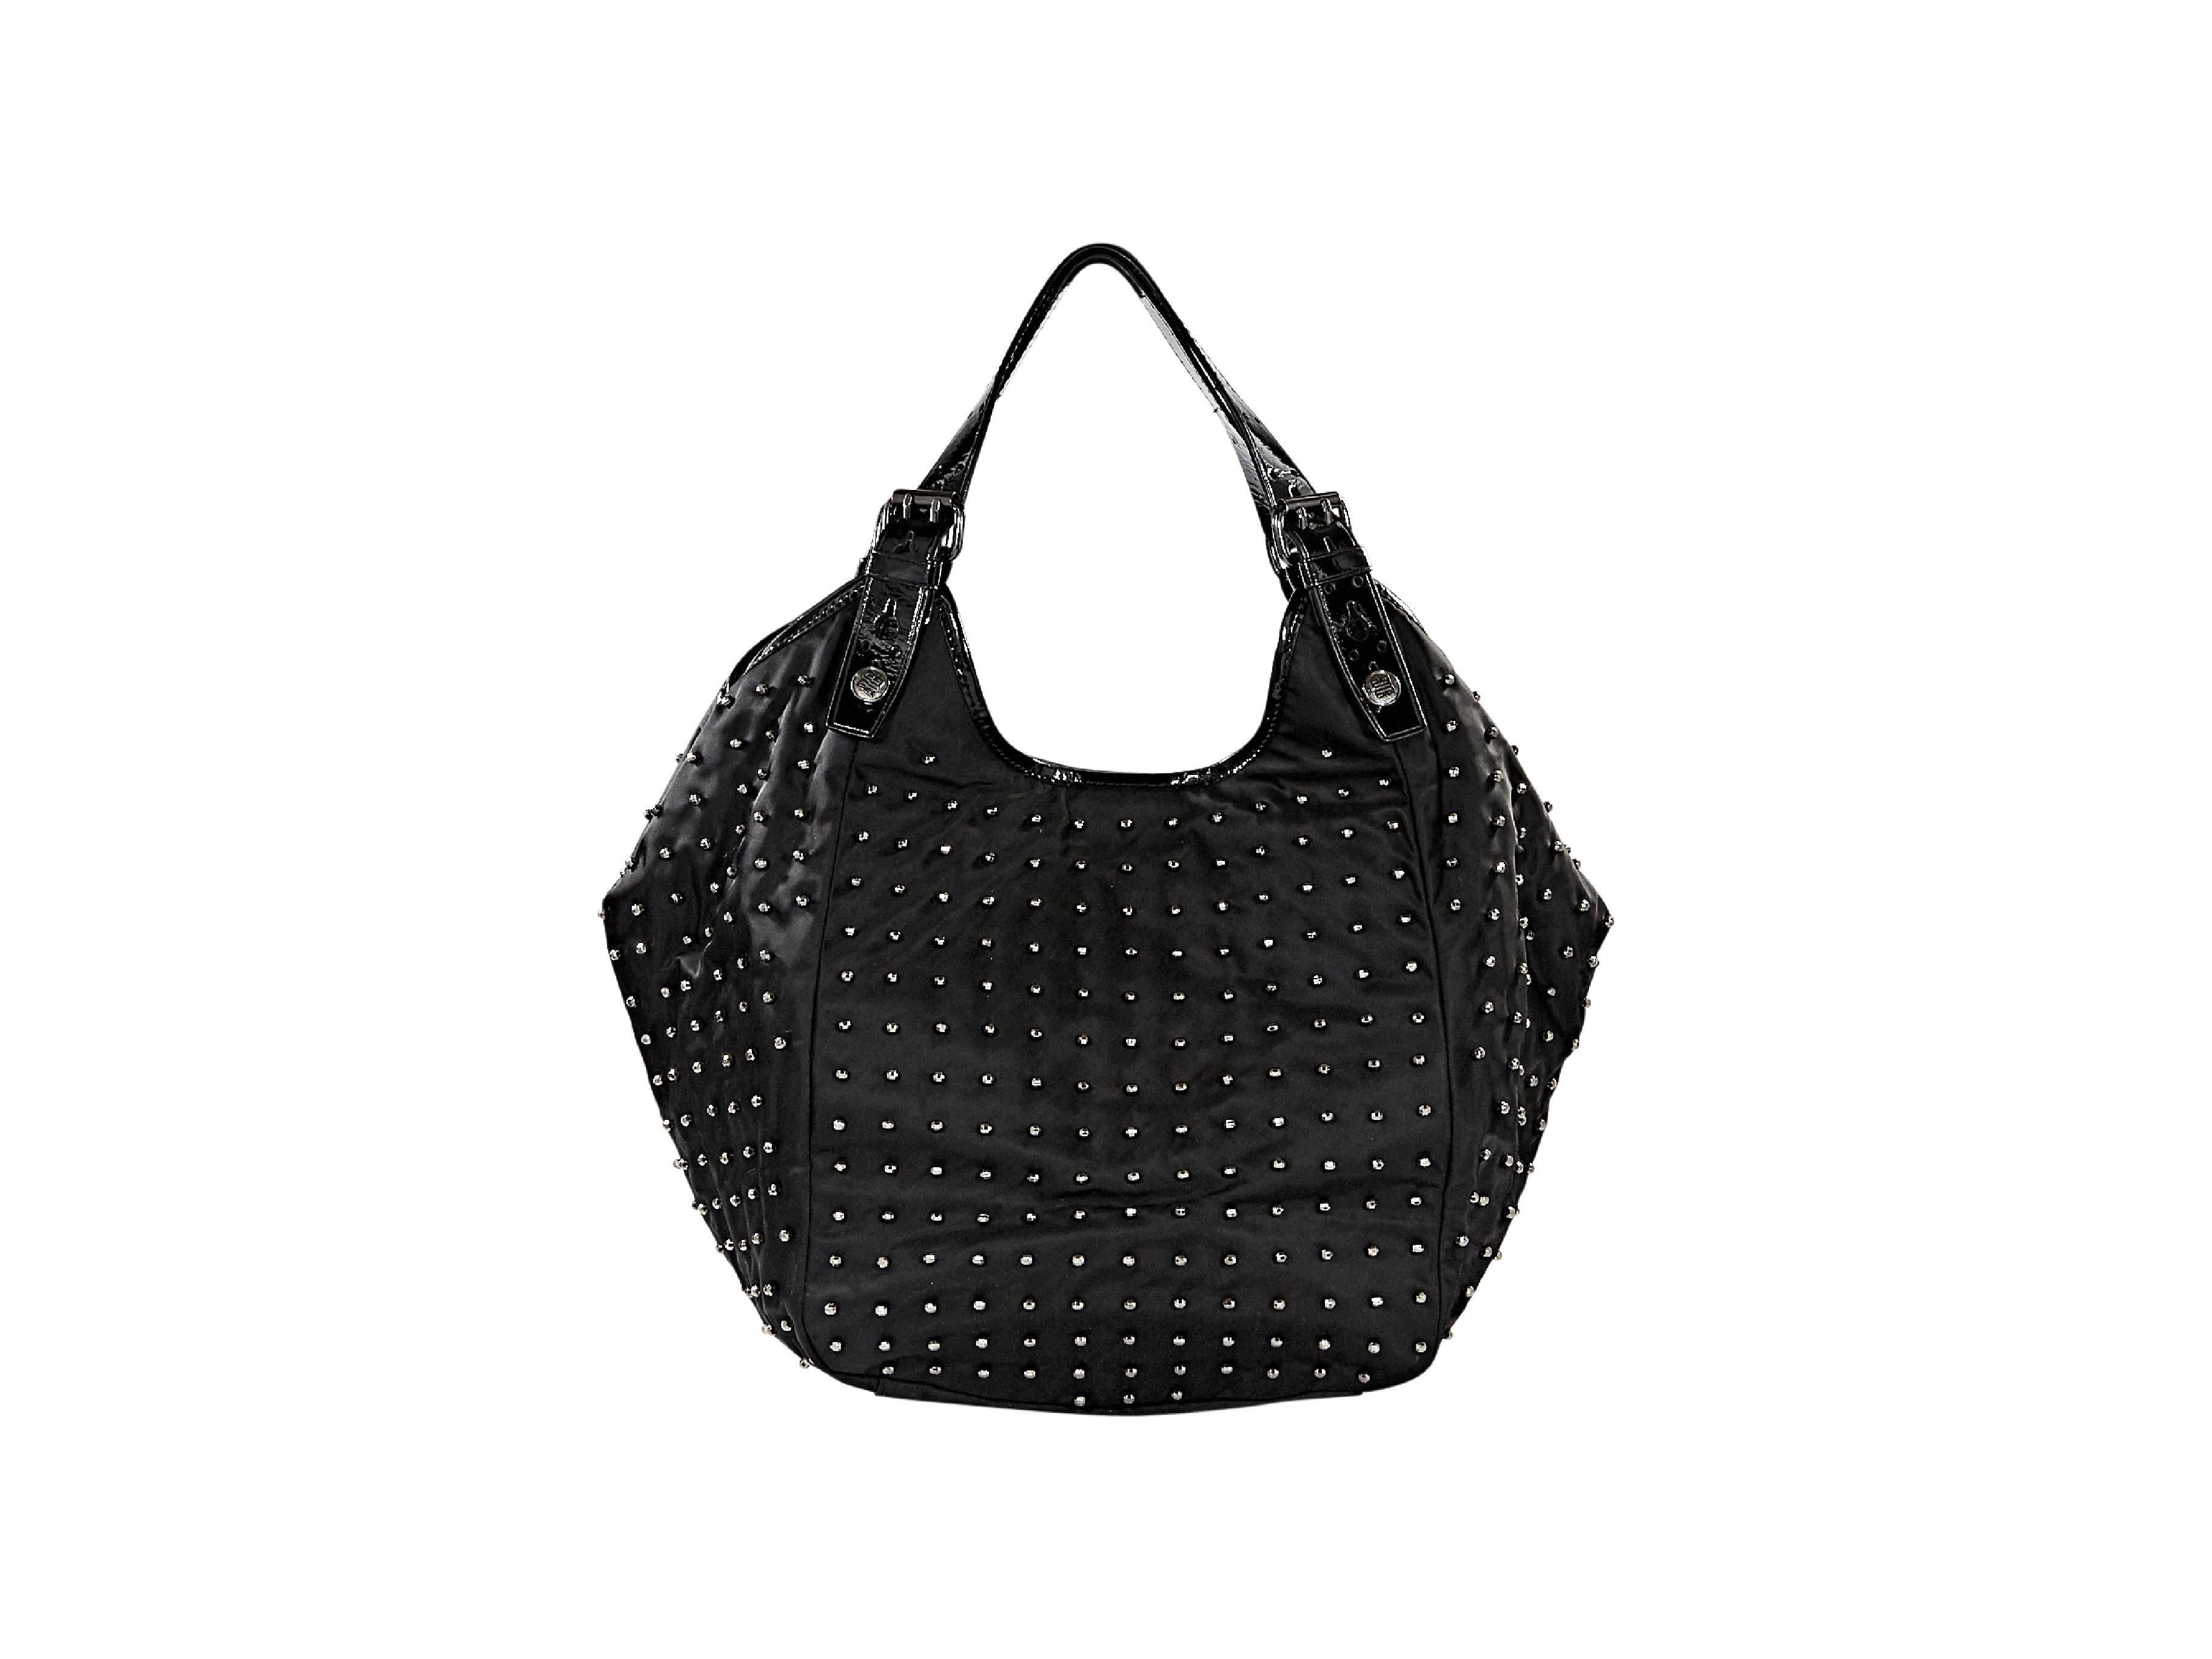 Black hobo bag by Givenchy.  Allover silvertone beads.  Double shoulder straps.  Silvertone hardware.  10.5